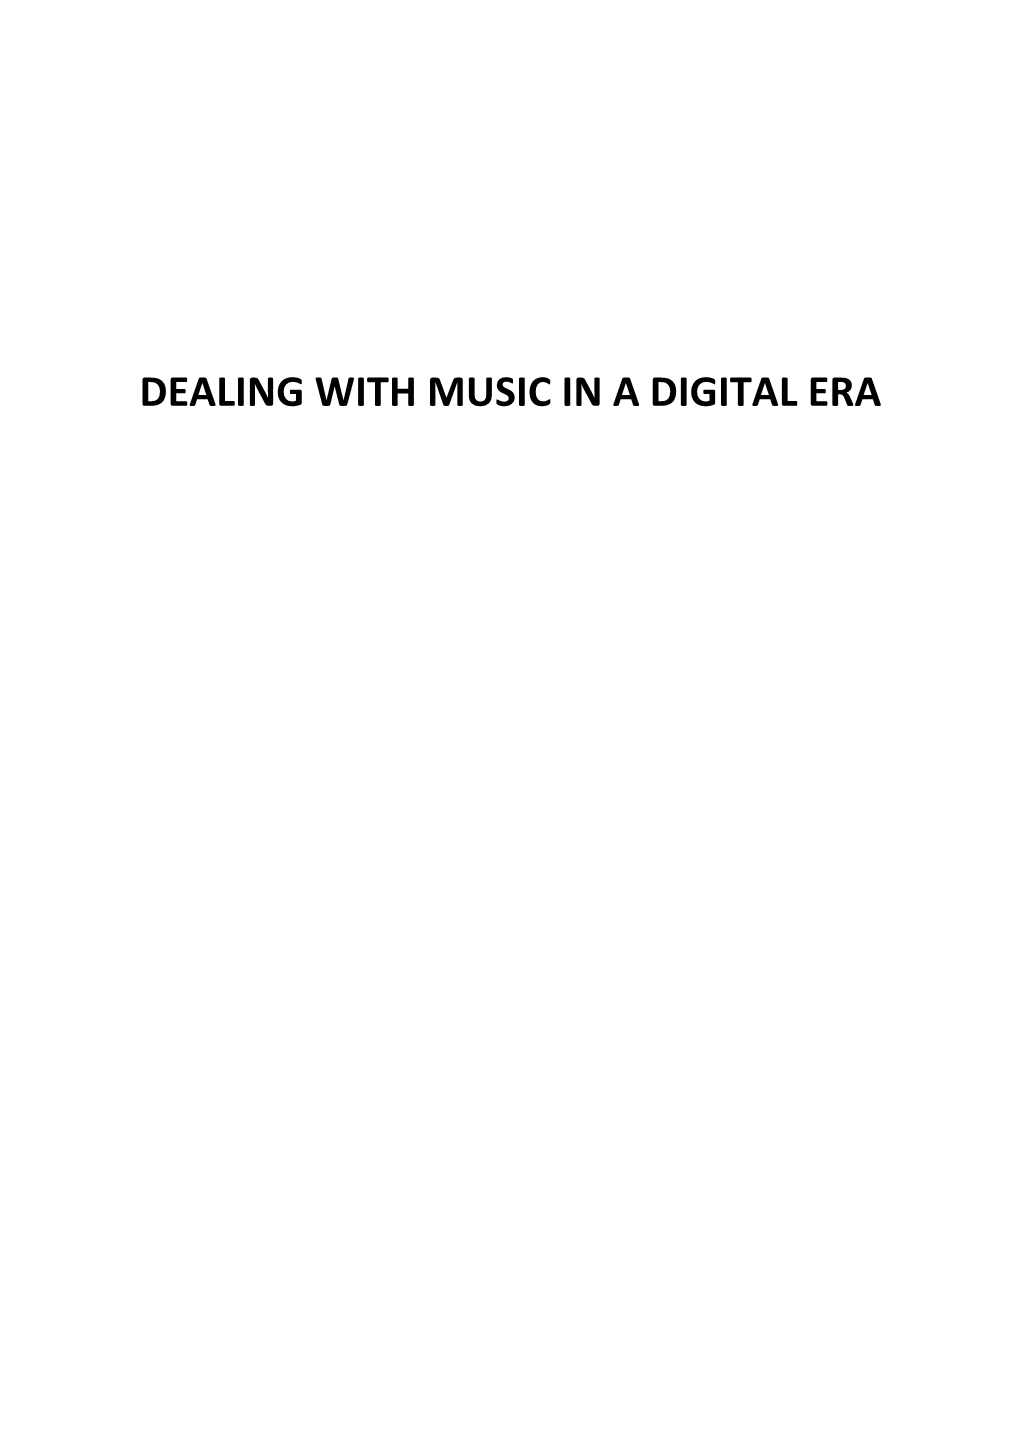 Dealing with Music in a Digital Era